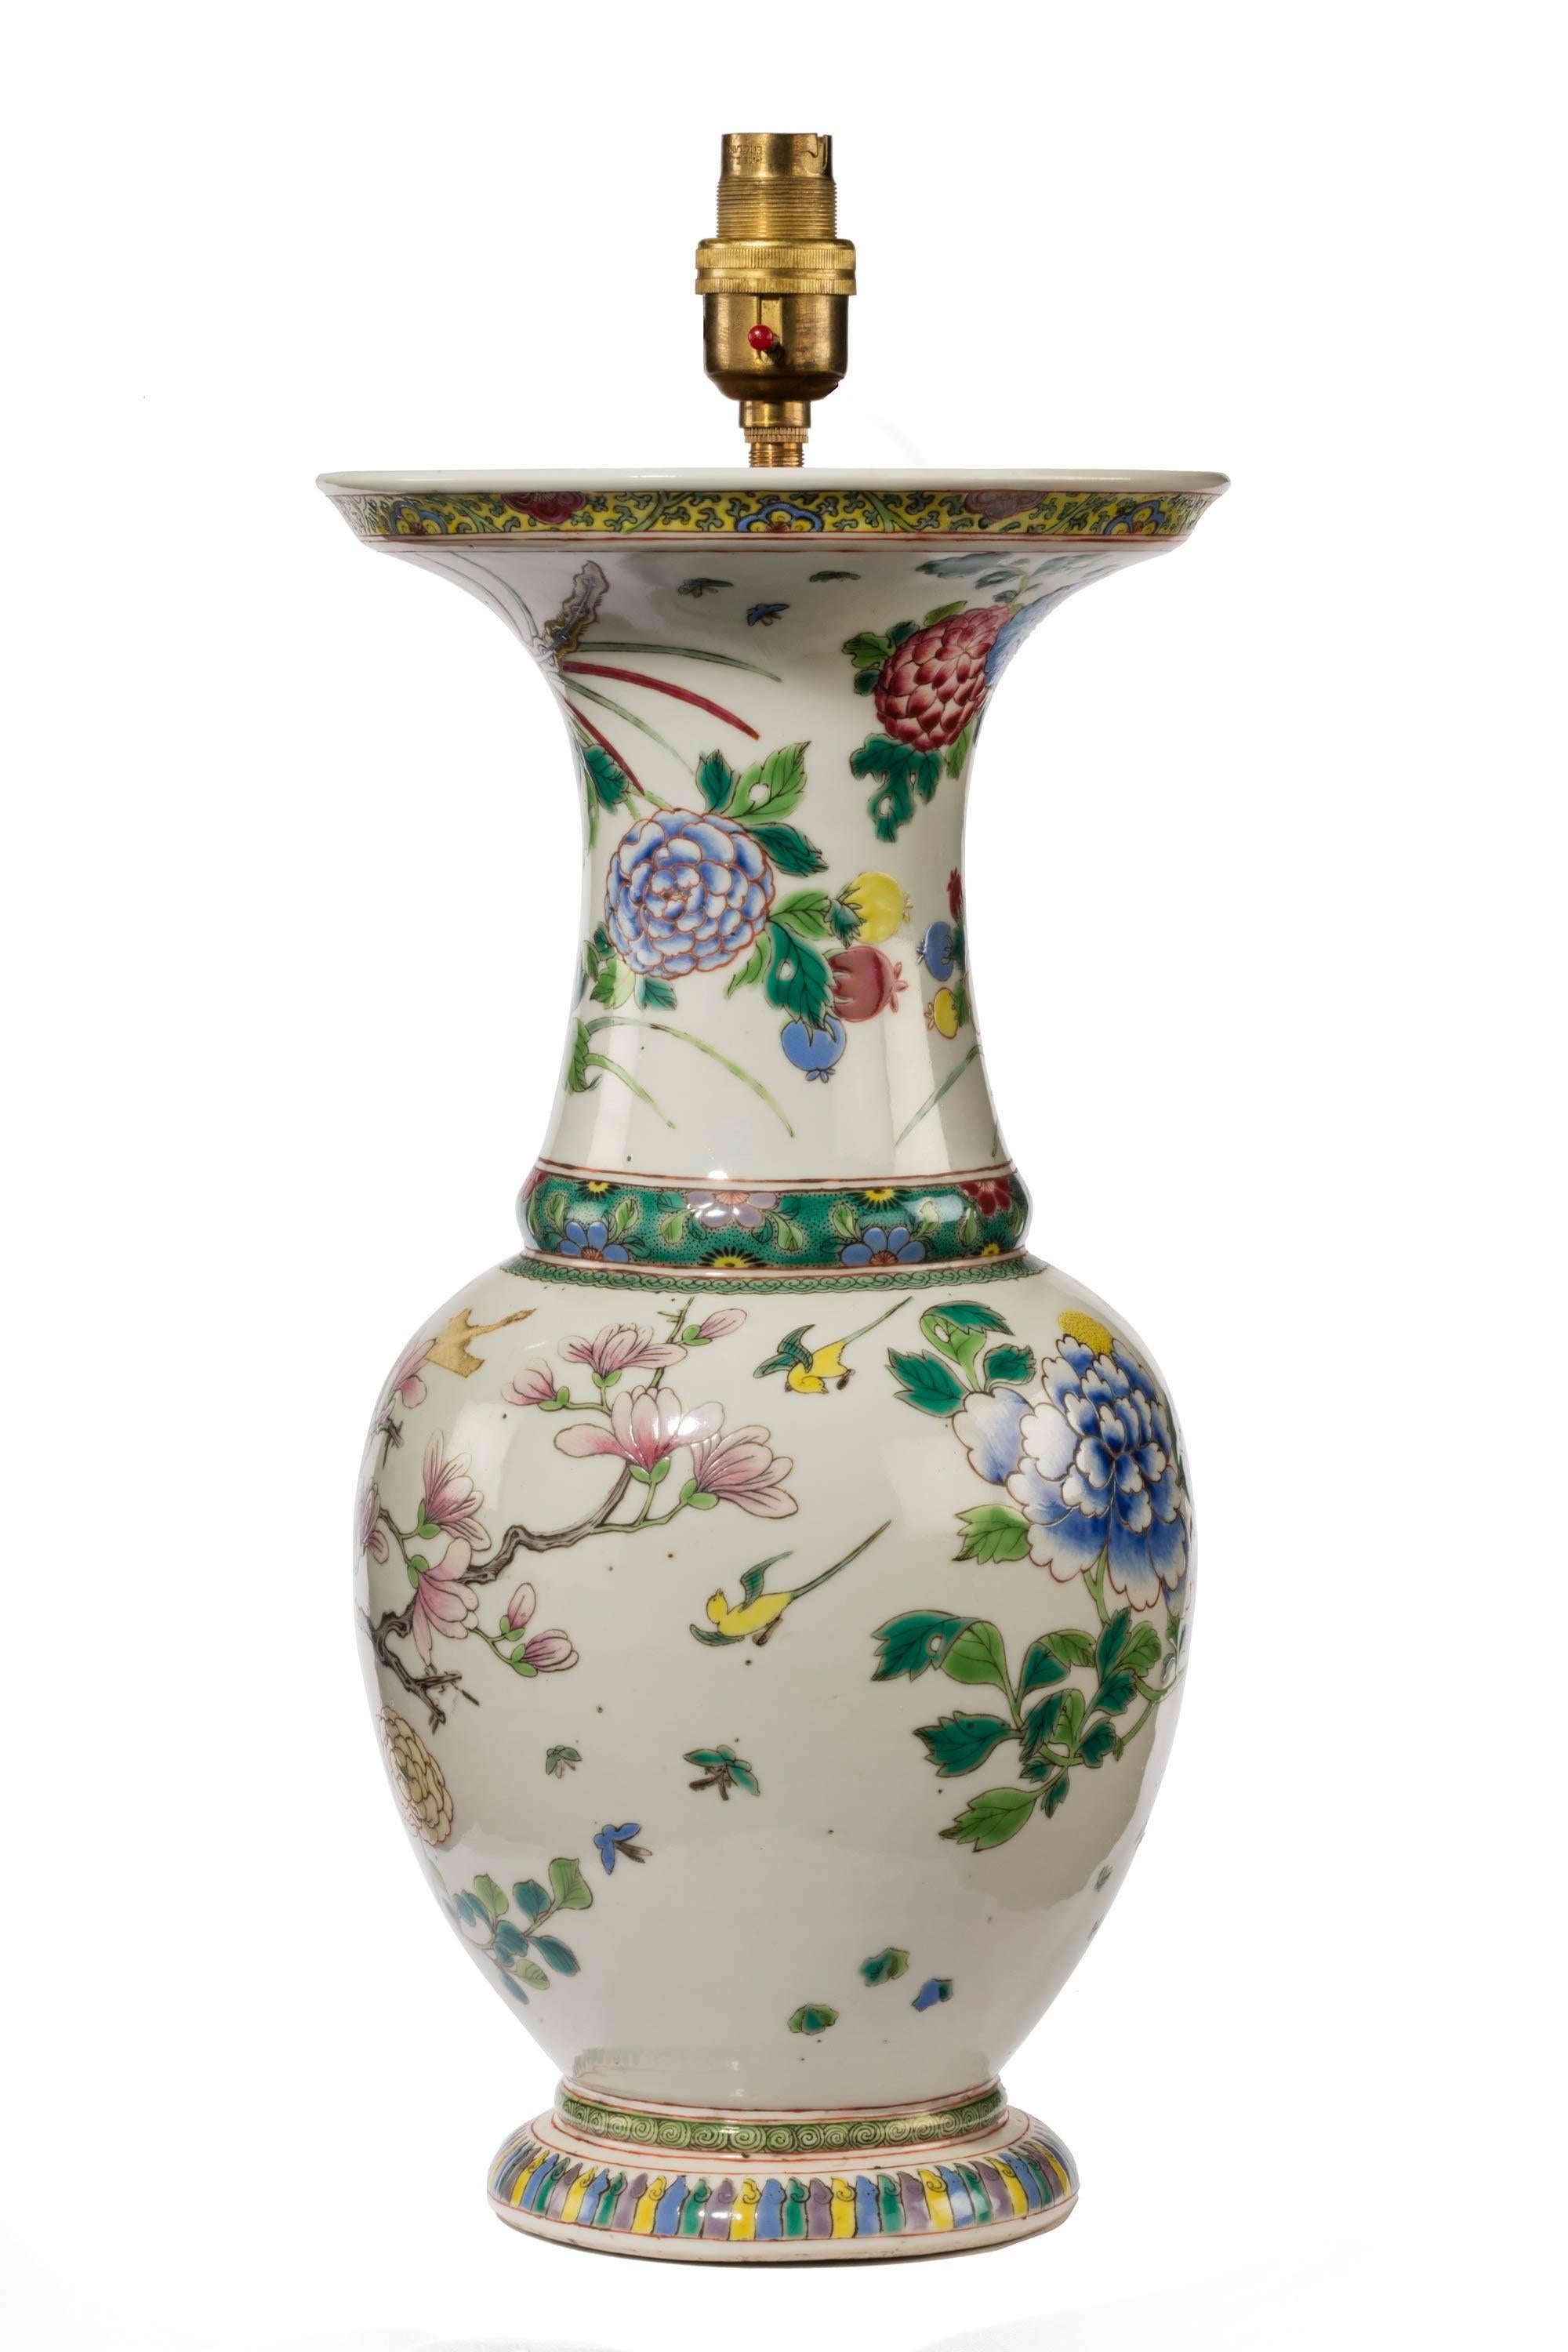 A shaped Chinese mid-20th century porcelain vase lamp with a flared top. Finely enamelled with chrysanthemums, pyrenes and foliage